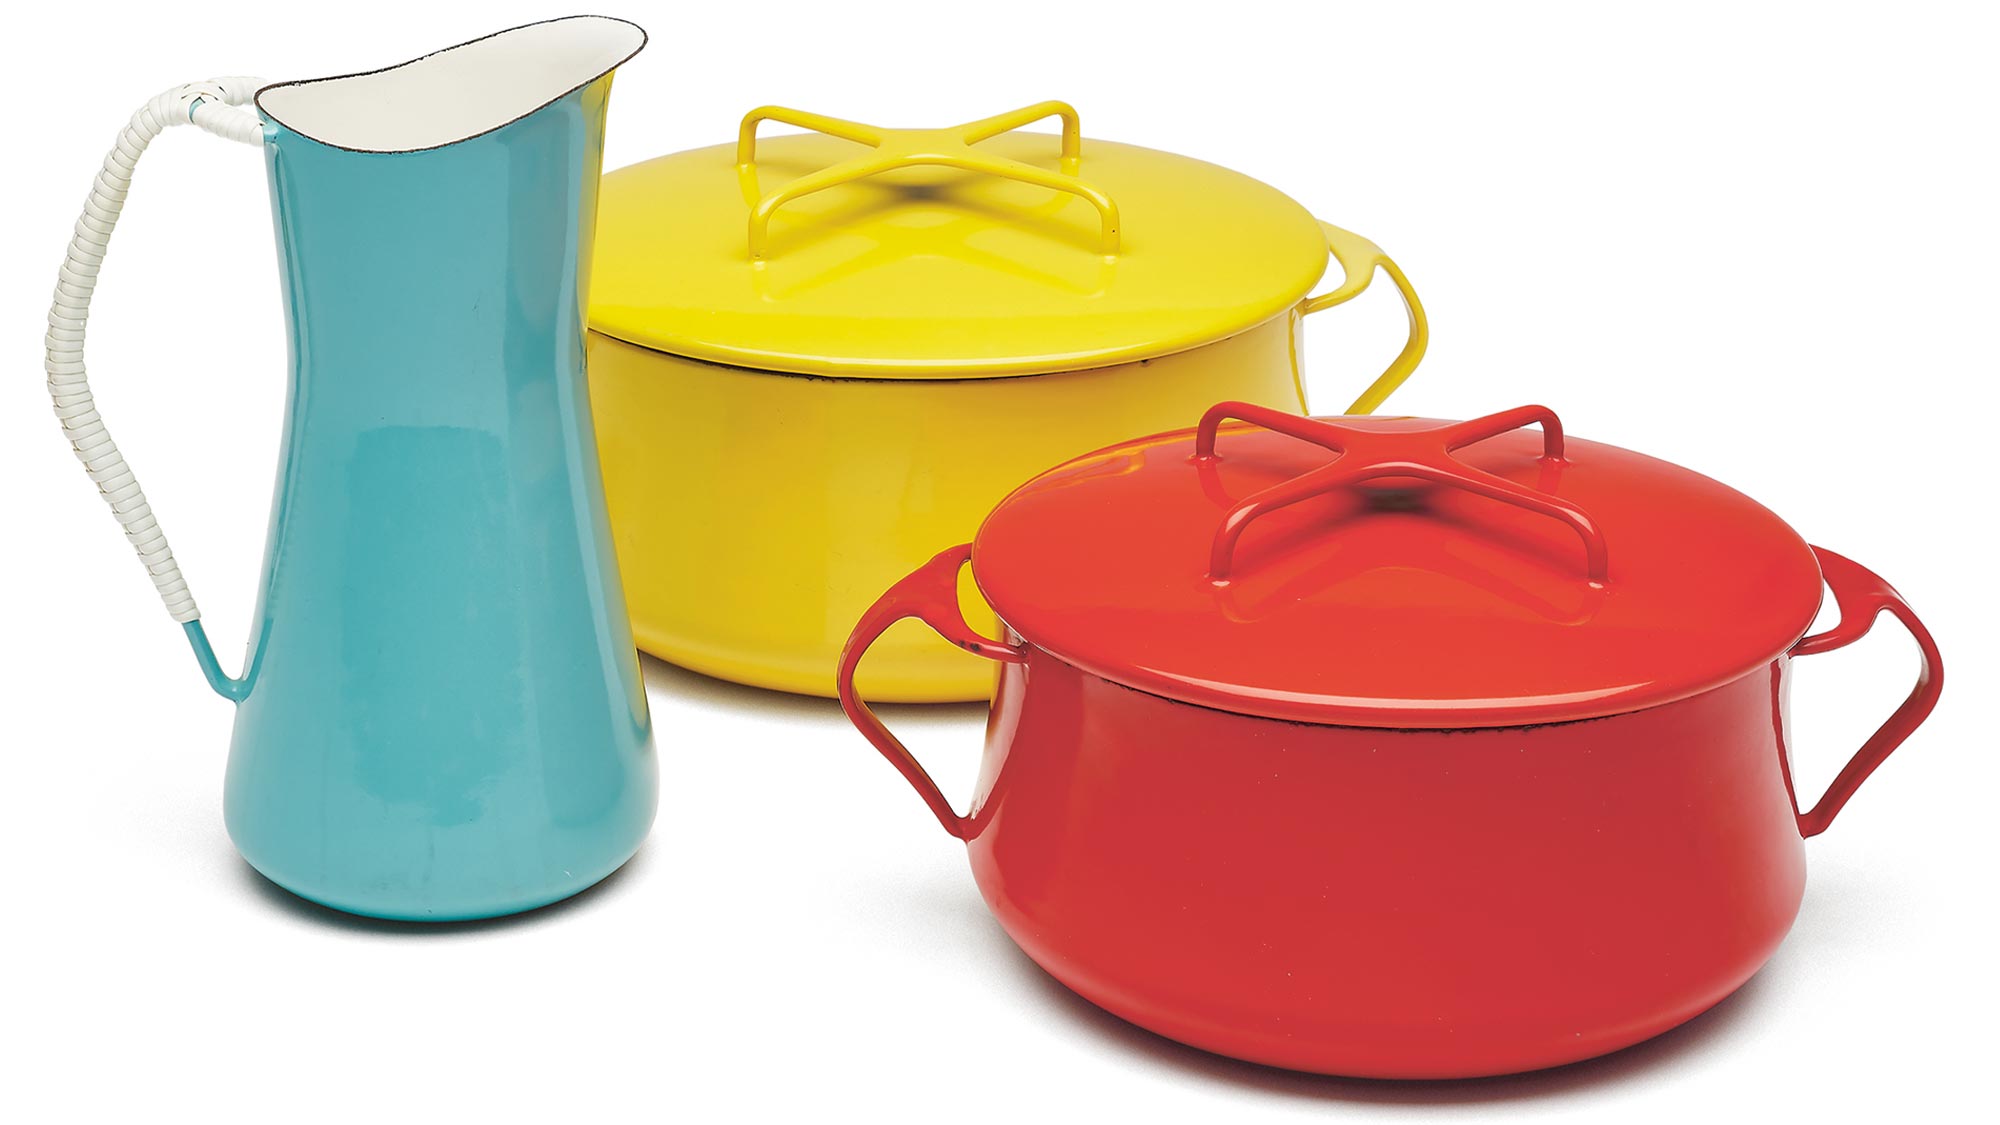 Red and yellow casserole dishes and blue pitcher